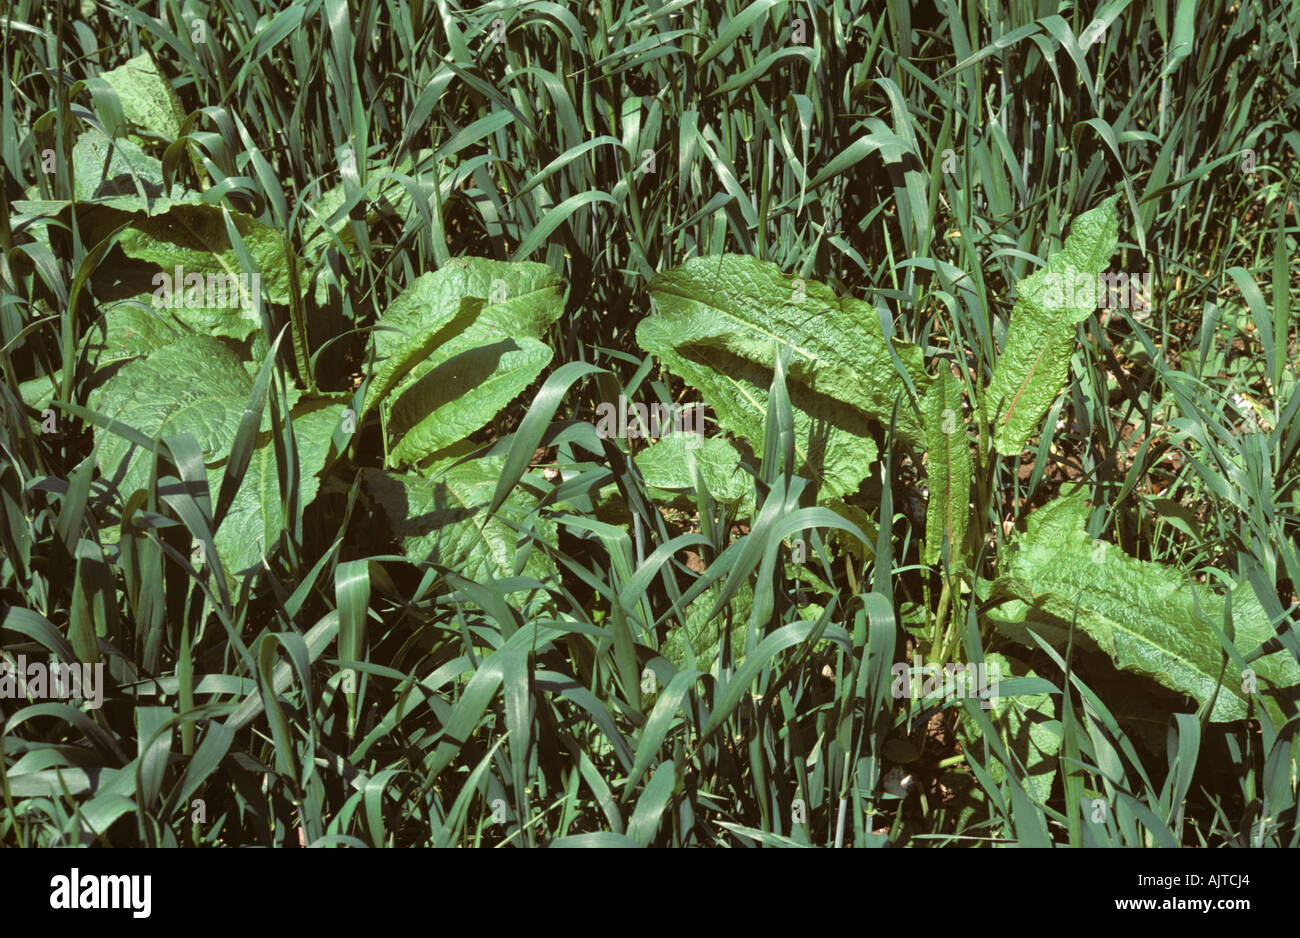 Broad dock Rumex obtusifolius in a young wheat crop Stock Photo